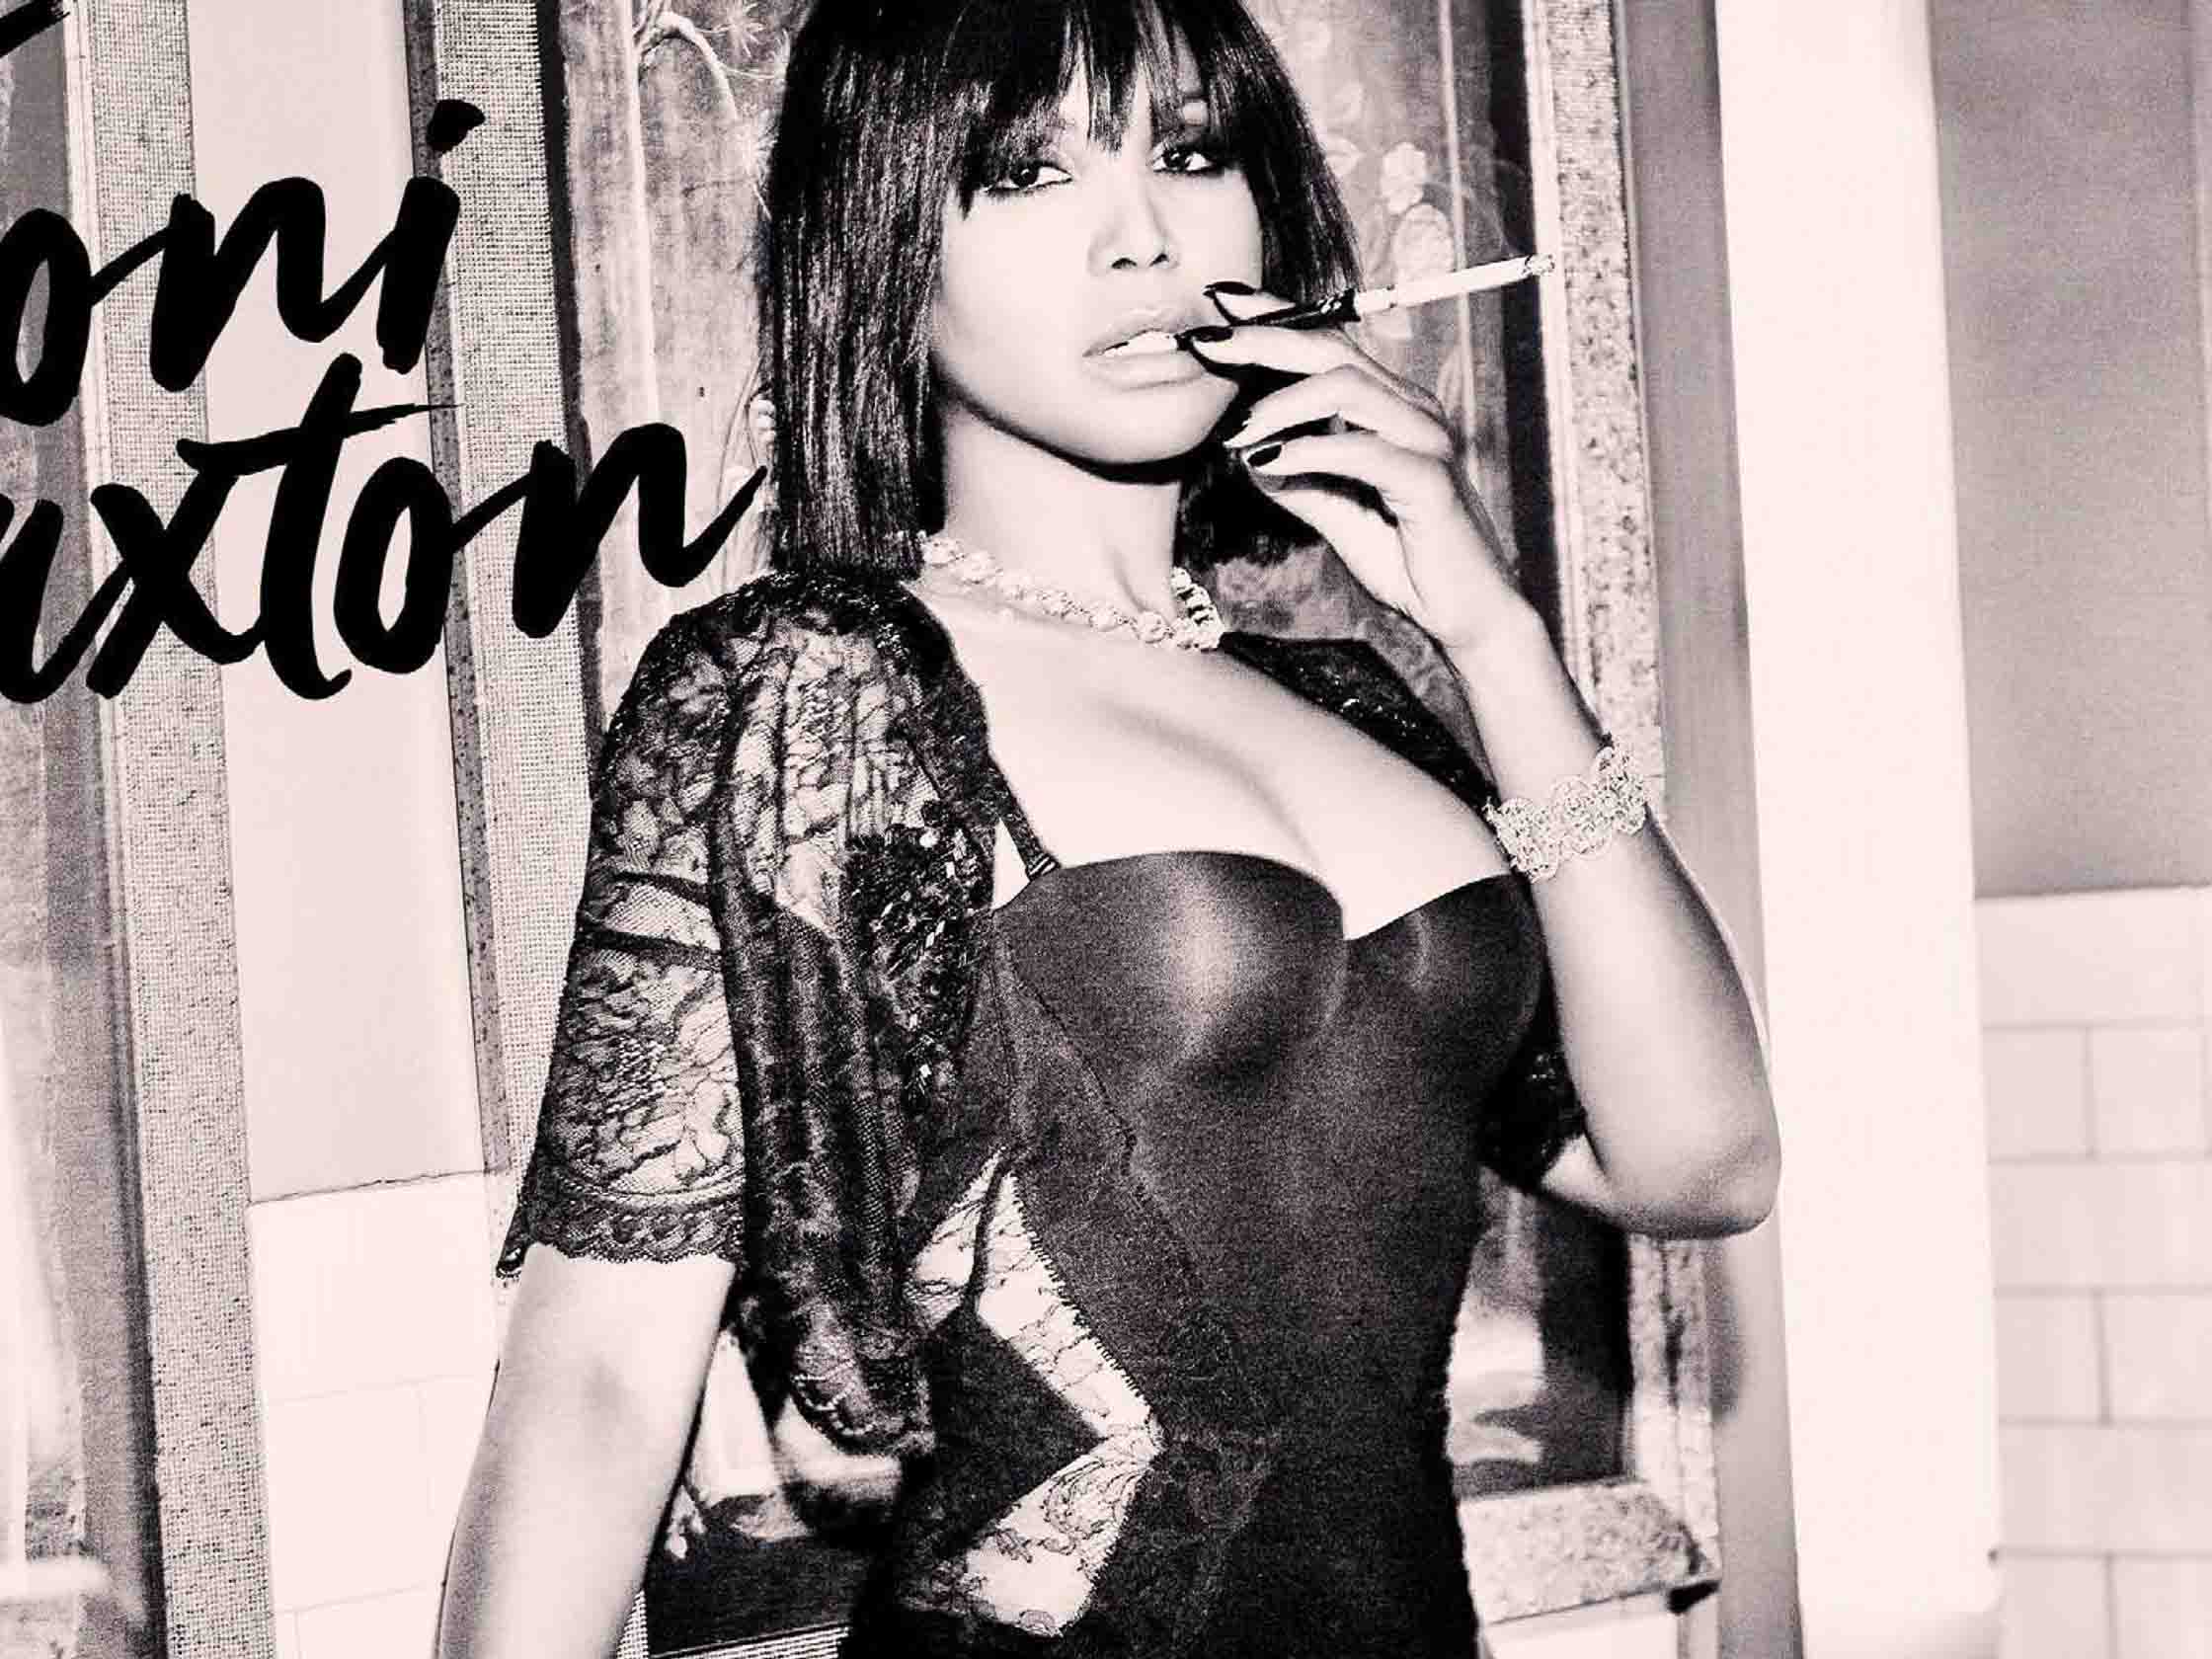 Sex & Cigarettes is the eighth studio album by American recording artist Toni Braxton, which was released on March 23, 2018, b...